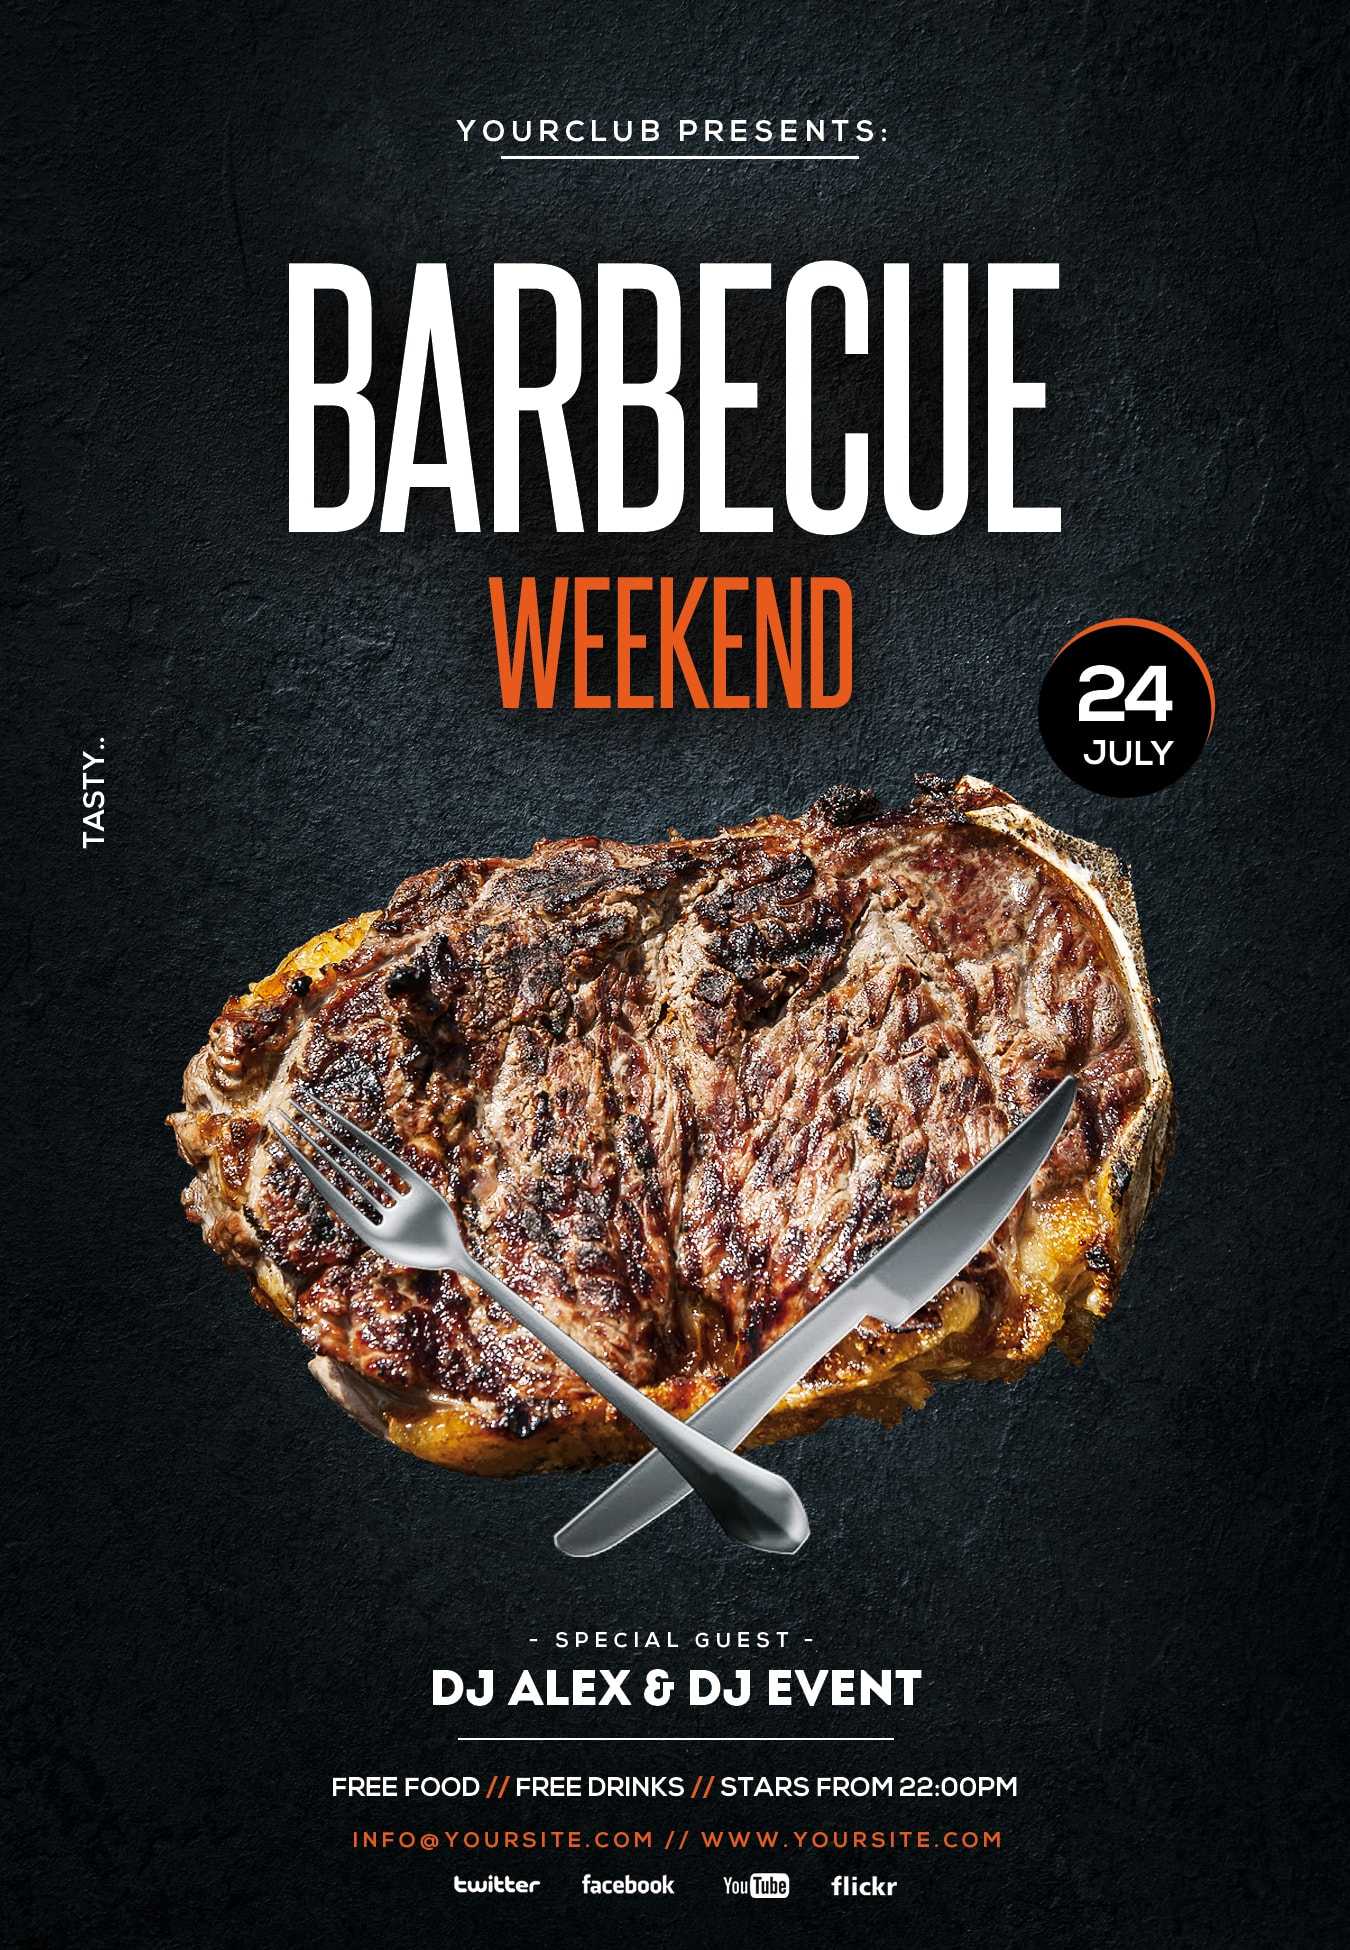 Barbecue Bbq Weekend Free Psd Flyer Template – Psdflyer.co For Free Bbq Flyer Template